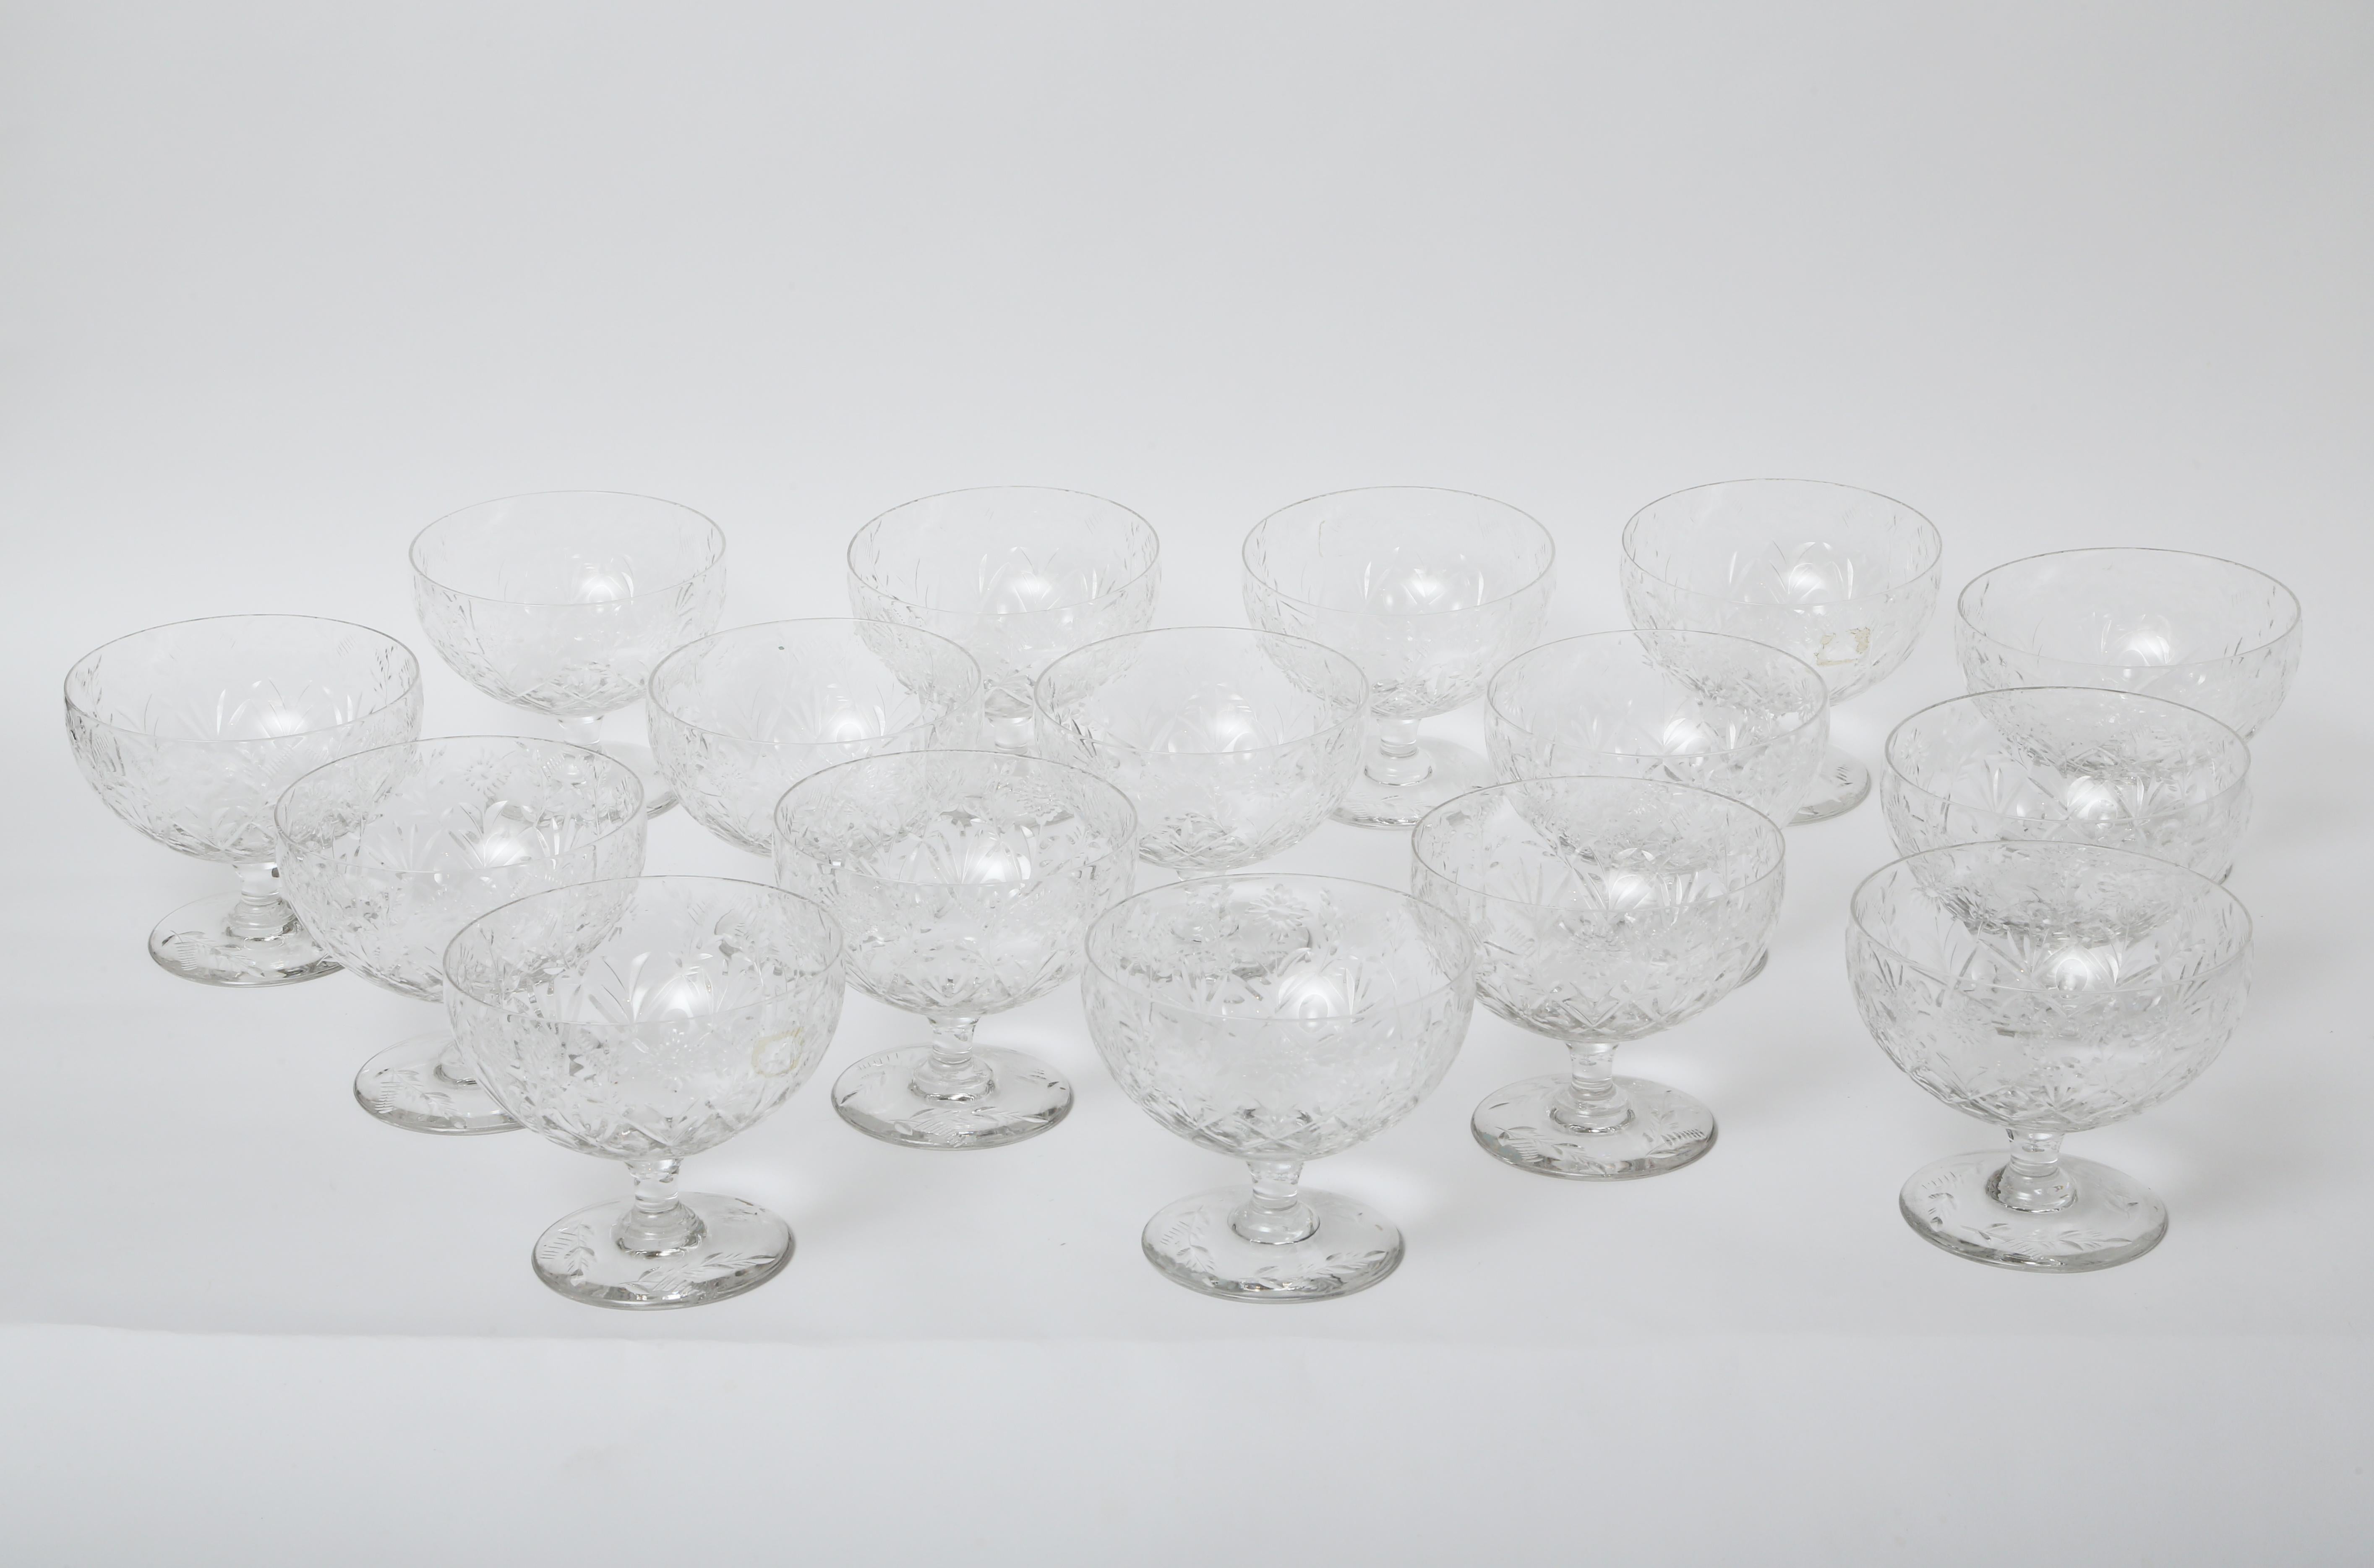 A great and practical set of nicely cut crystal coupes in a modified cross hatch design with a pedestal foot. A perfect size for desserts, ice cream, mousse and so much more. The elegant base on them enables them to sit up pretty on an underliner or